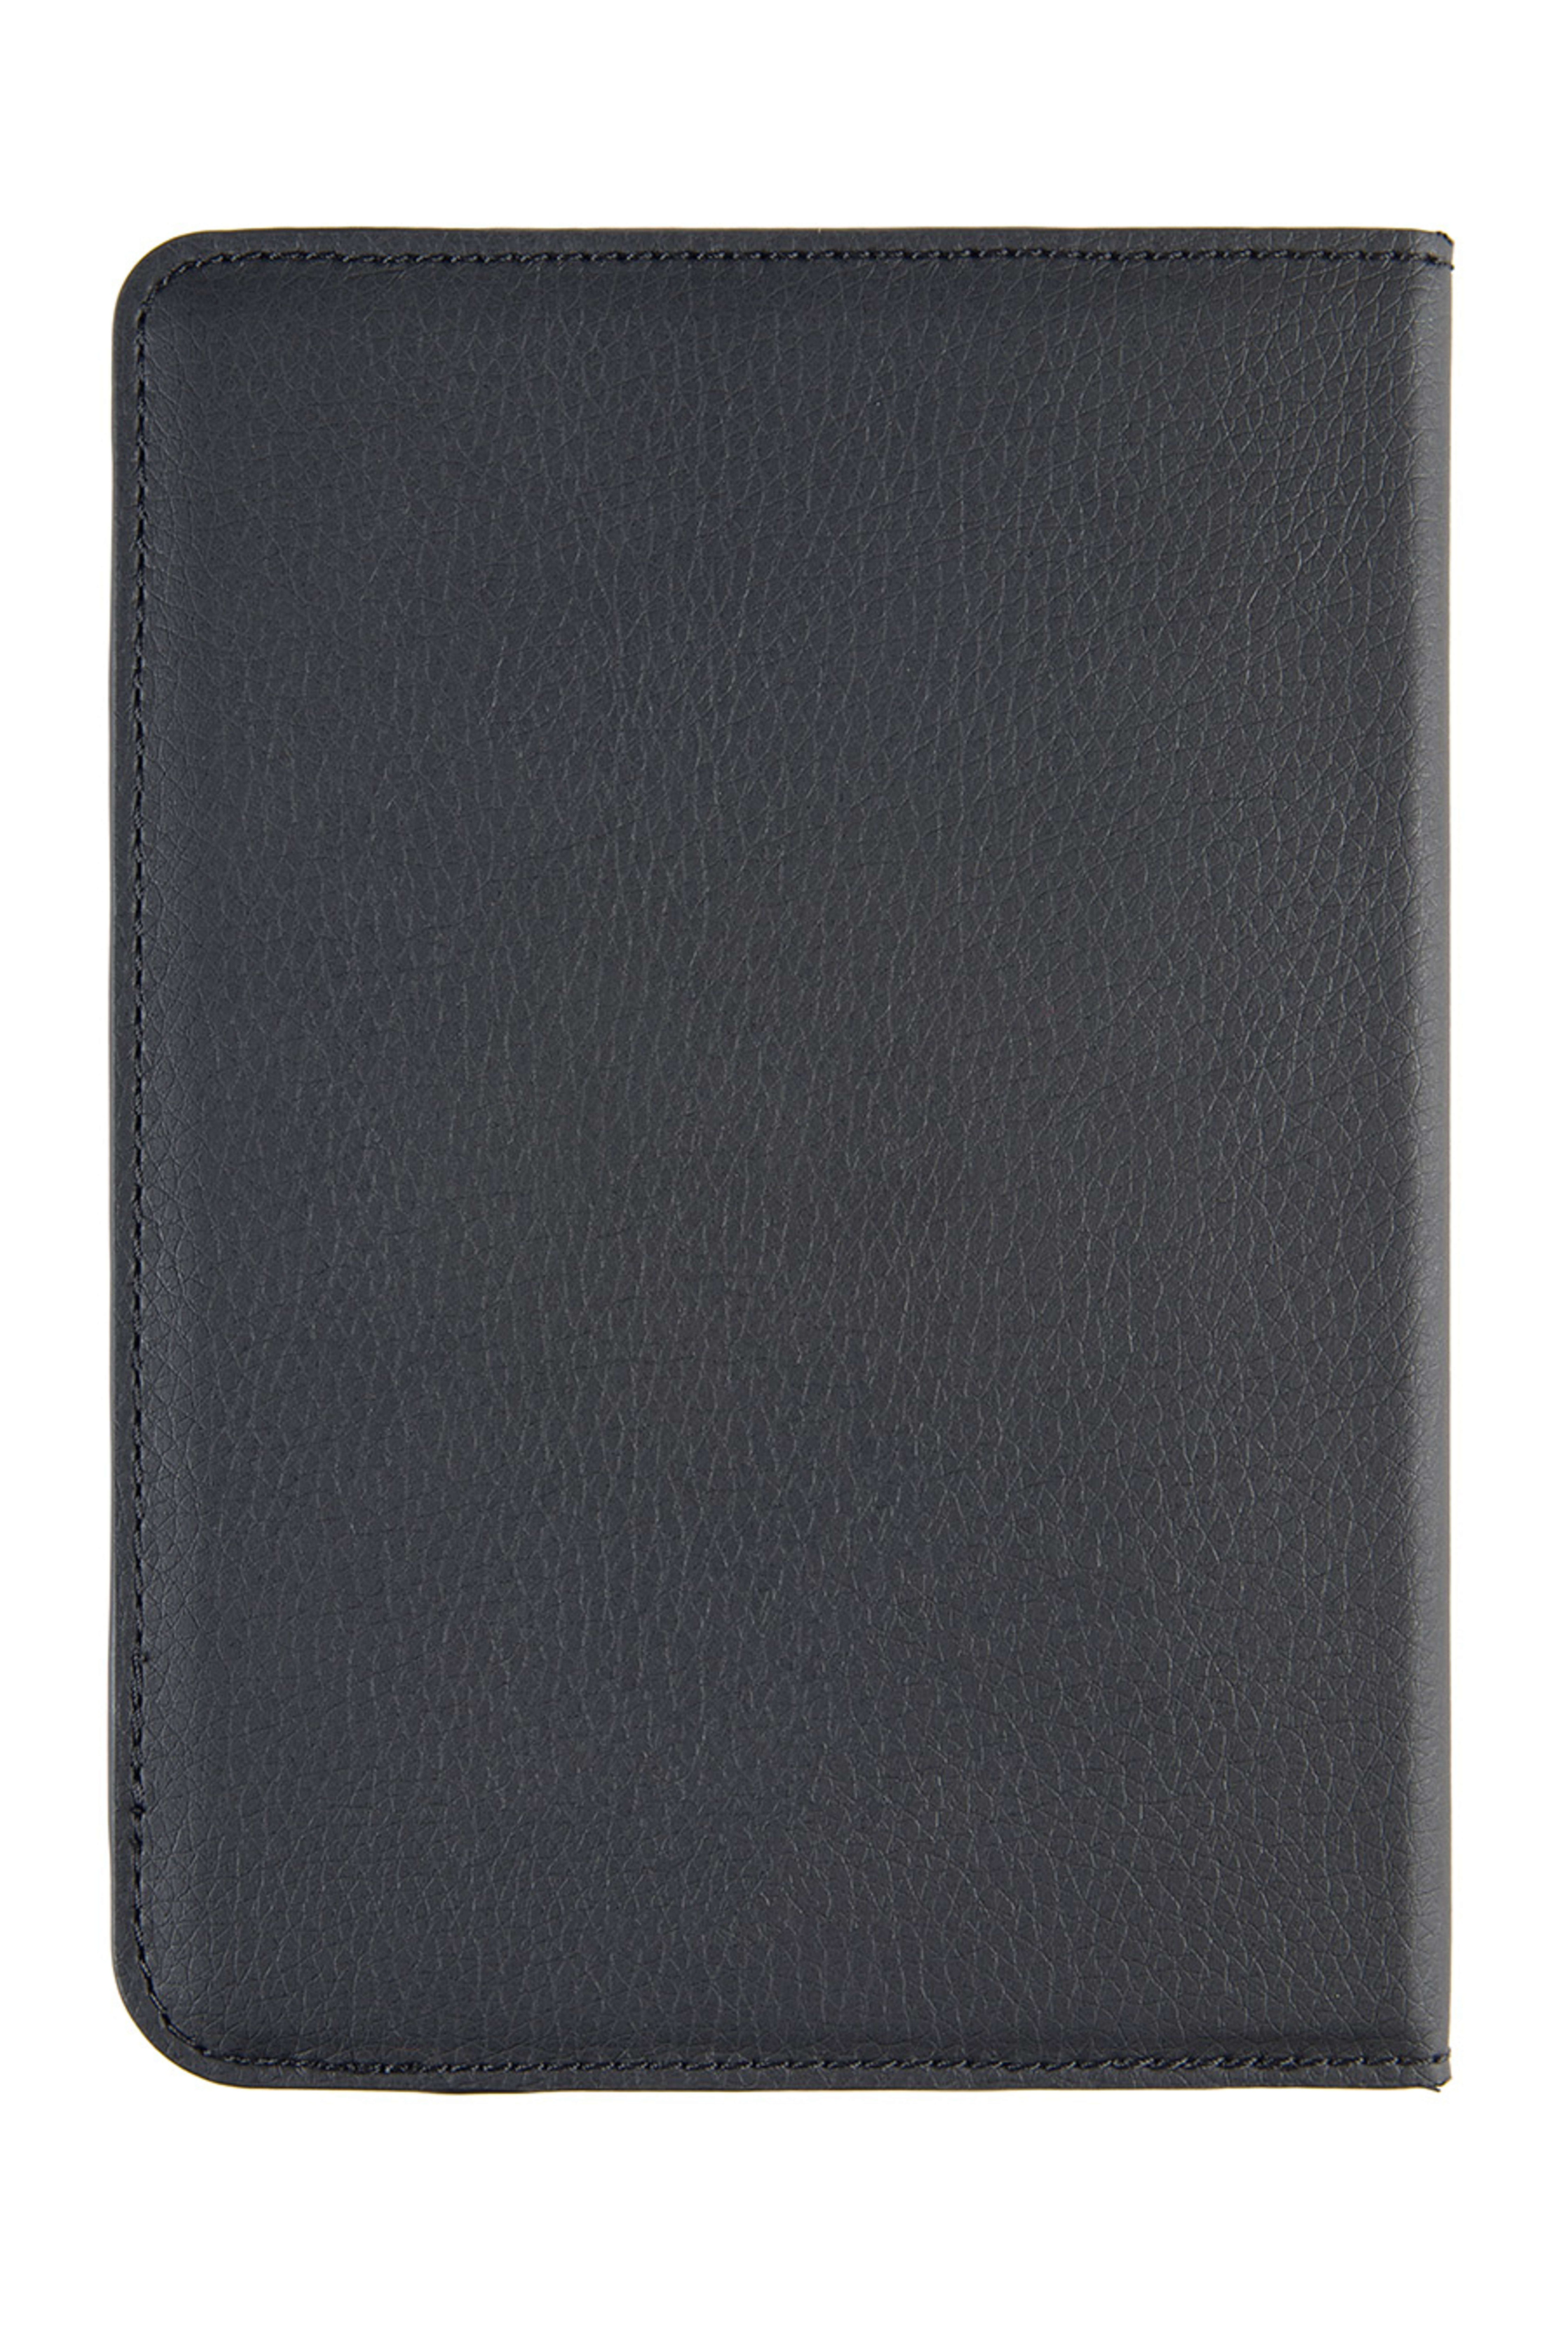 GECKO COVERS Luxe Cover Bookcover E-Book für Reader Kobo PU Leather, Hülle Schwarz